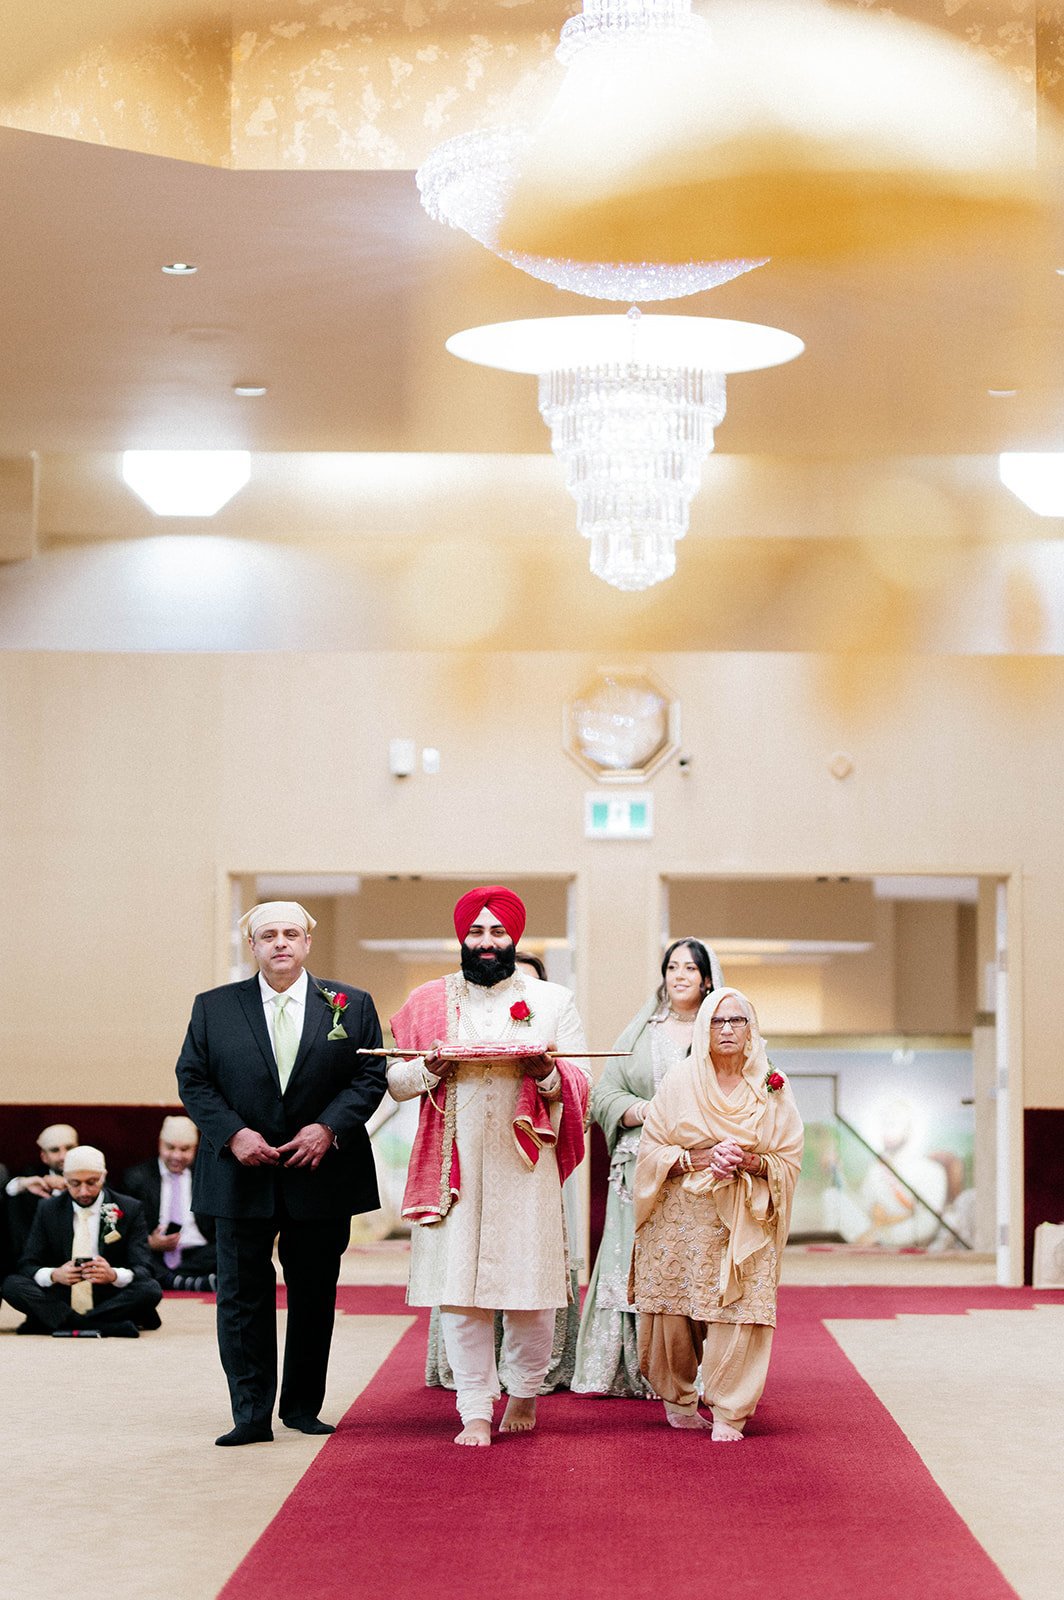 A indian groom in traditional dress is escorted by his parents down the aisle in a gurdwara